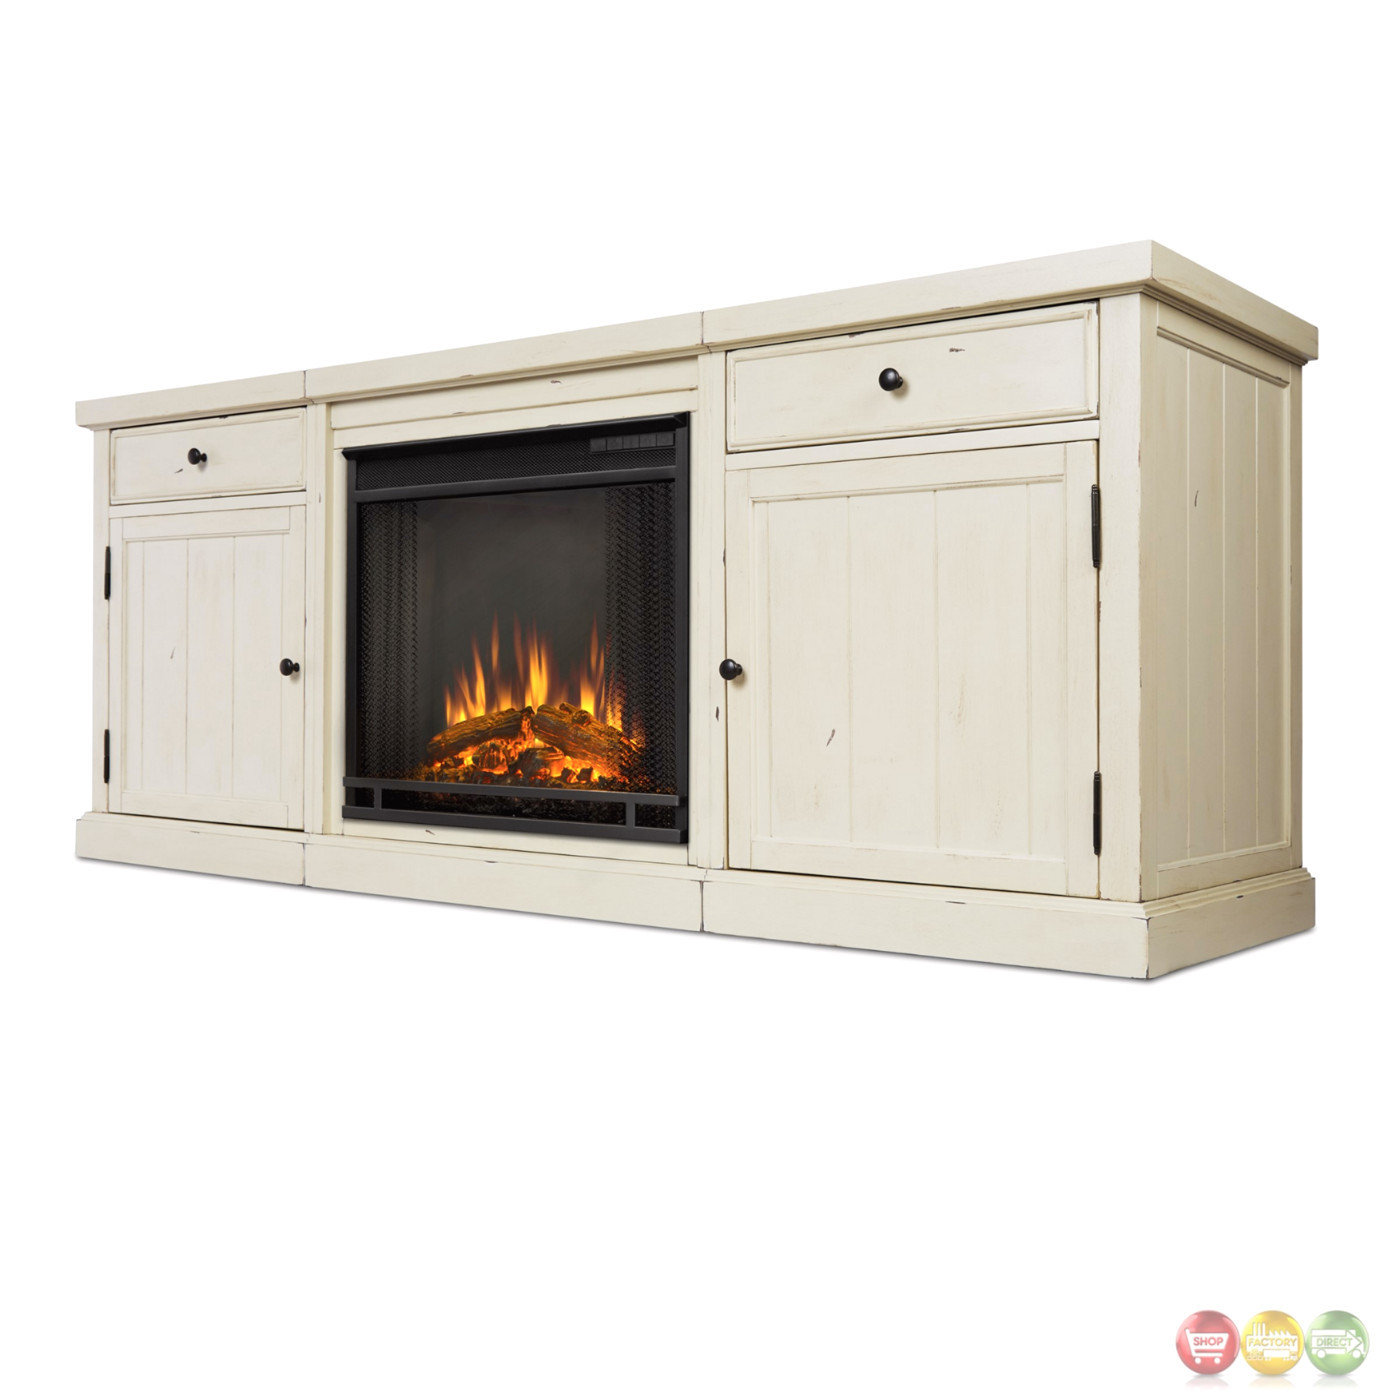 White Electric Fireplace Entertainment Center
 Cassidy Entertainment Center Electric Fireplace In